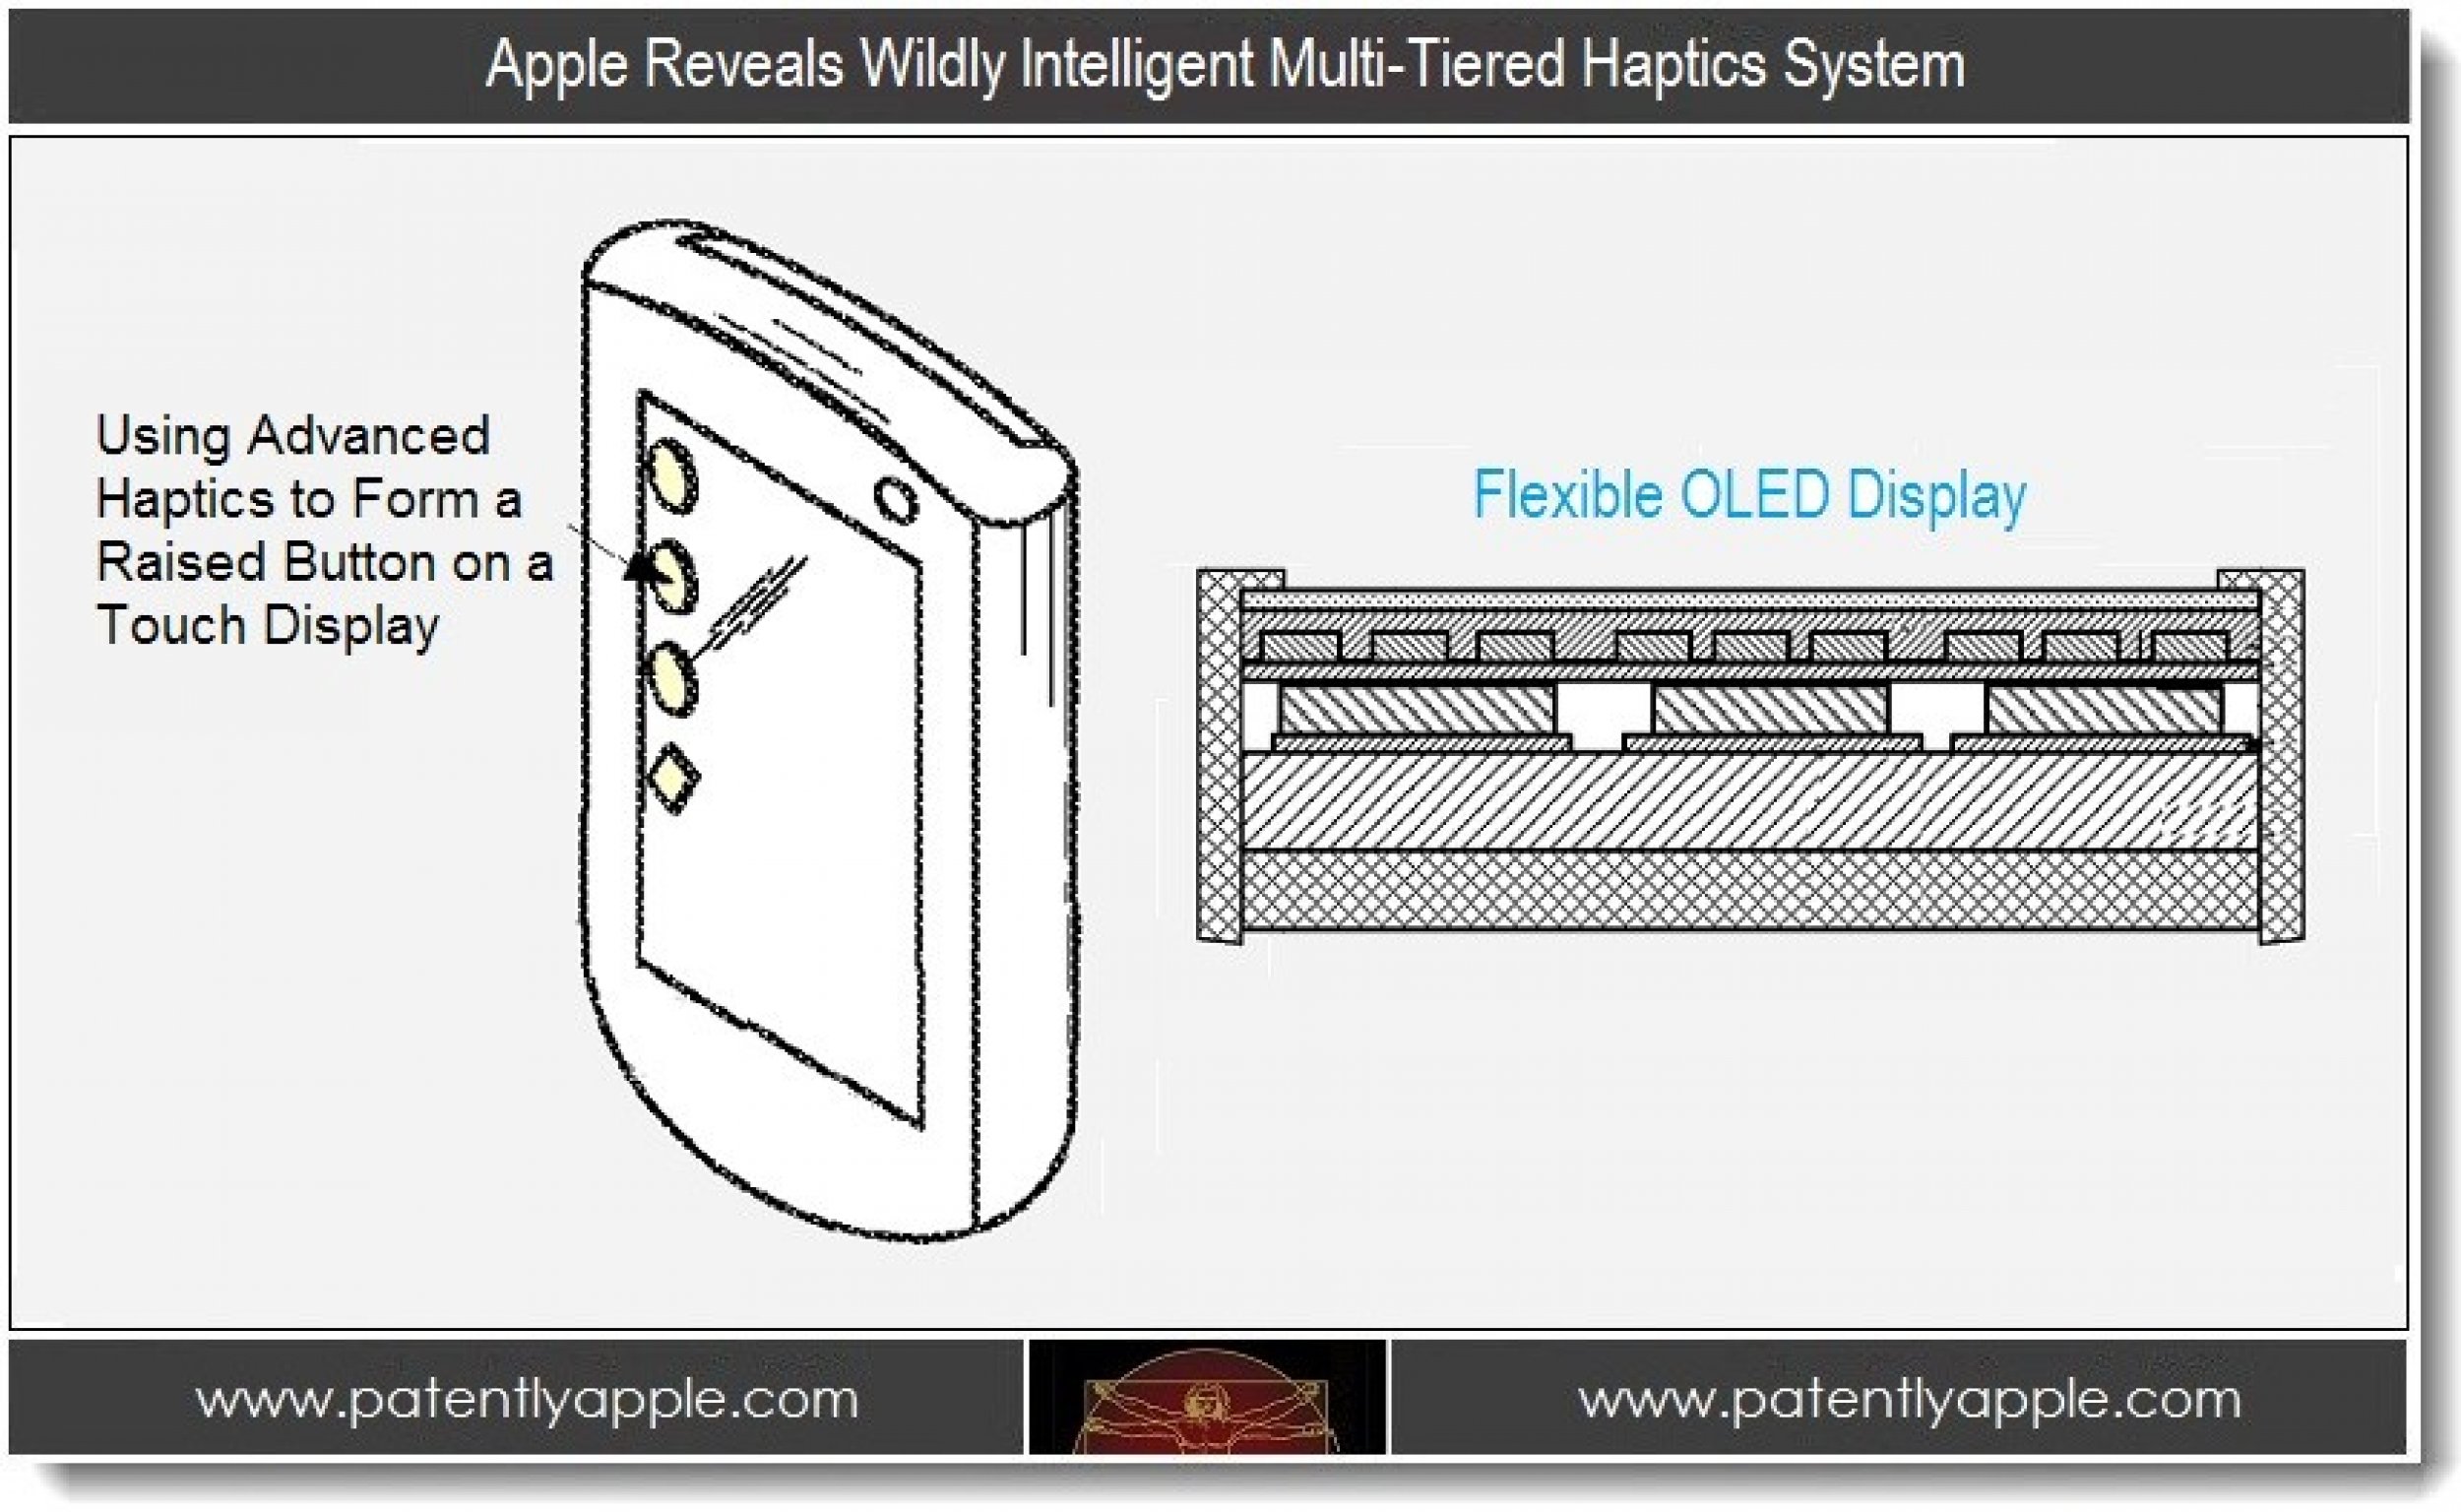 iPhone 5 Features Apple Patents Advanced Haptics For Flexible OLED Screen PICTURES